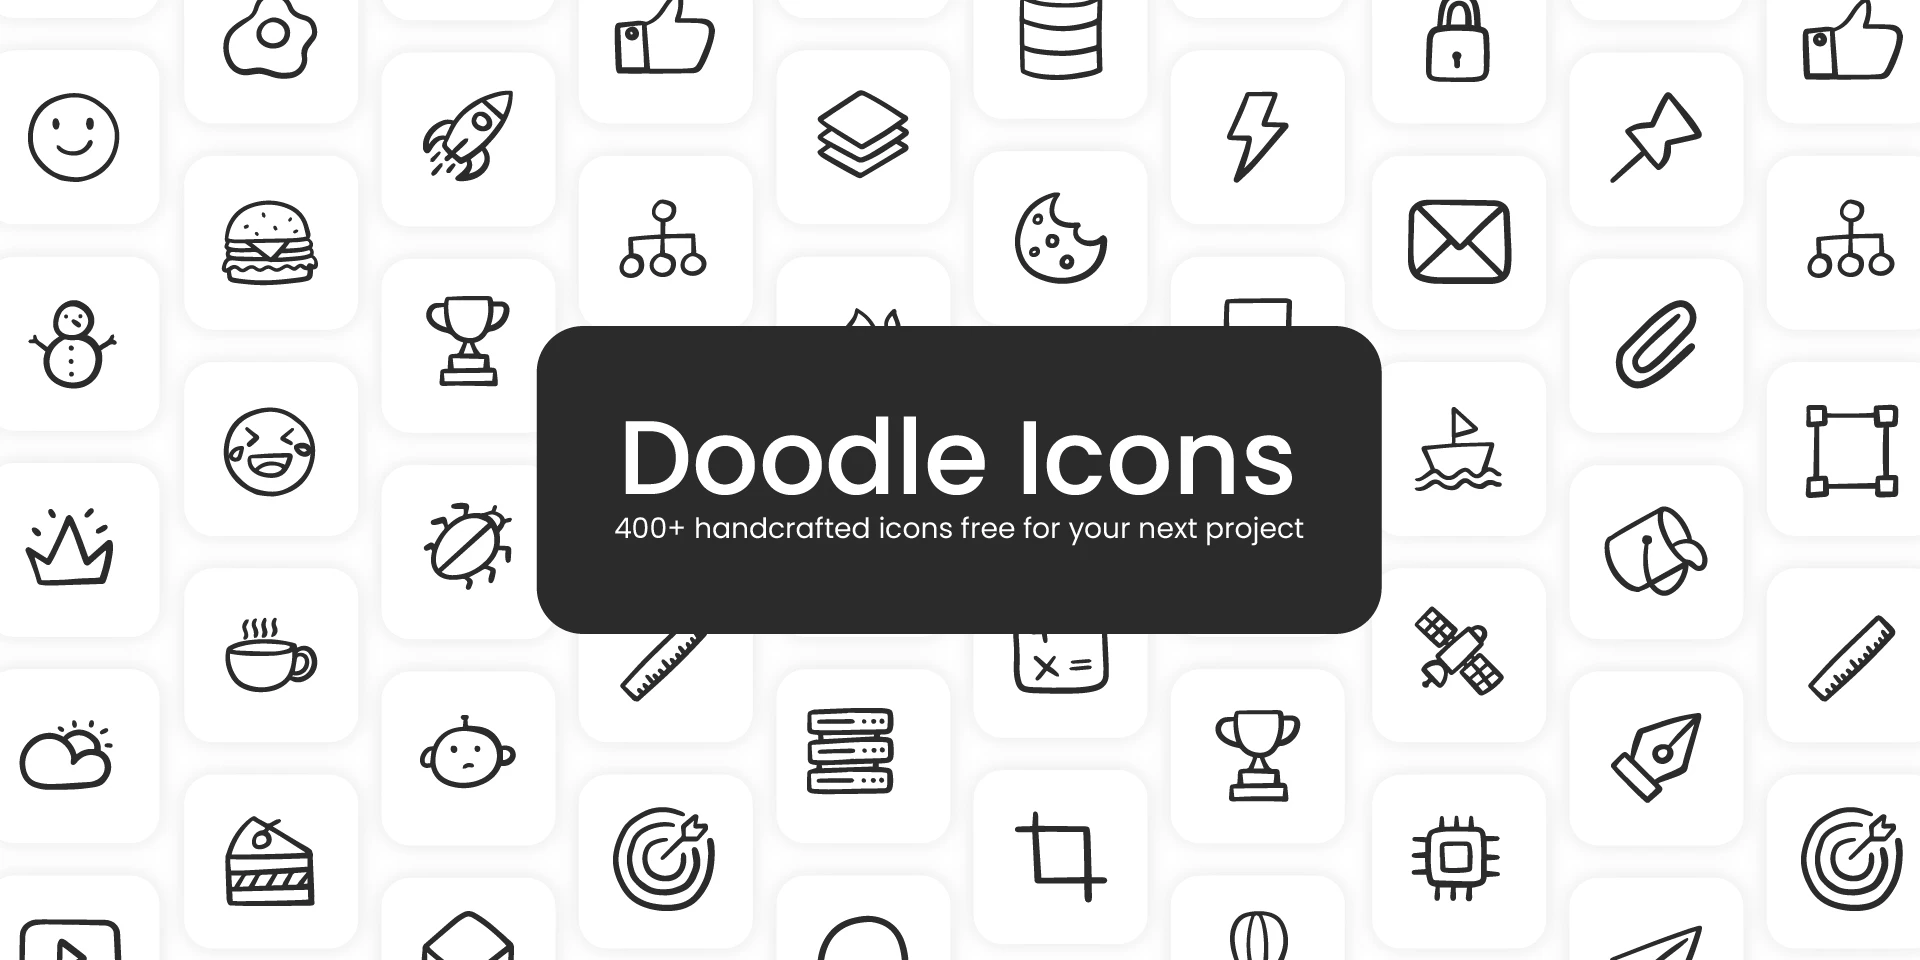 Doodle icons for Figma and Adobe XD